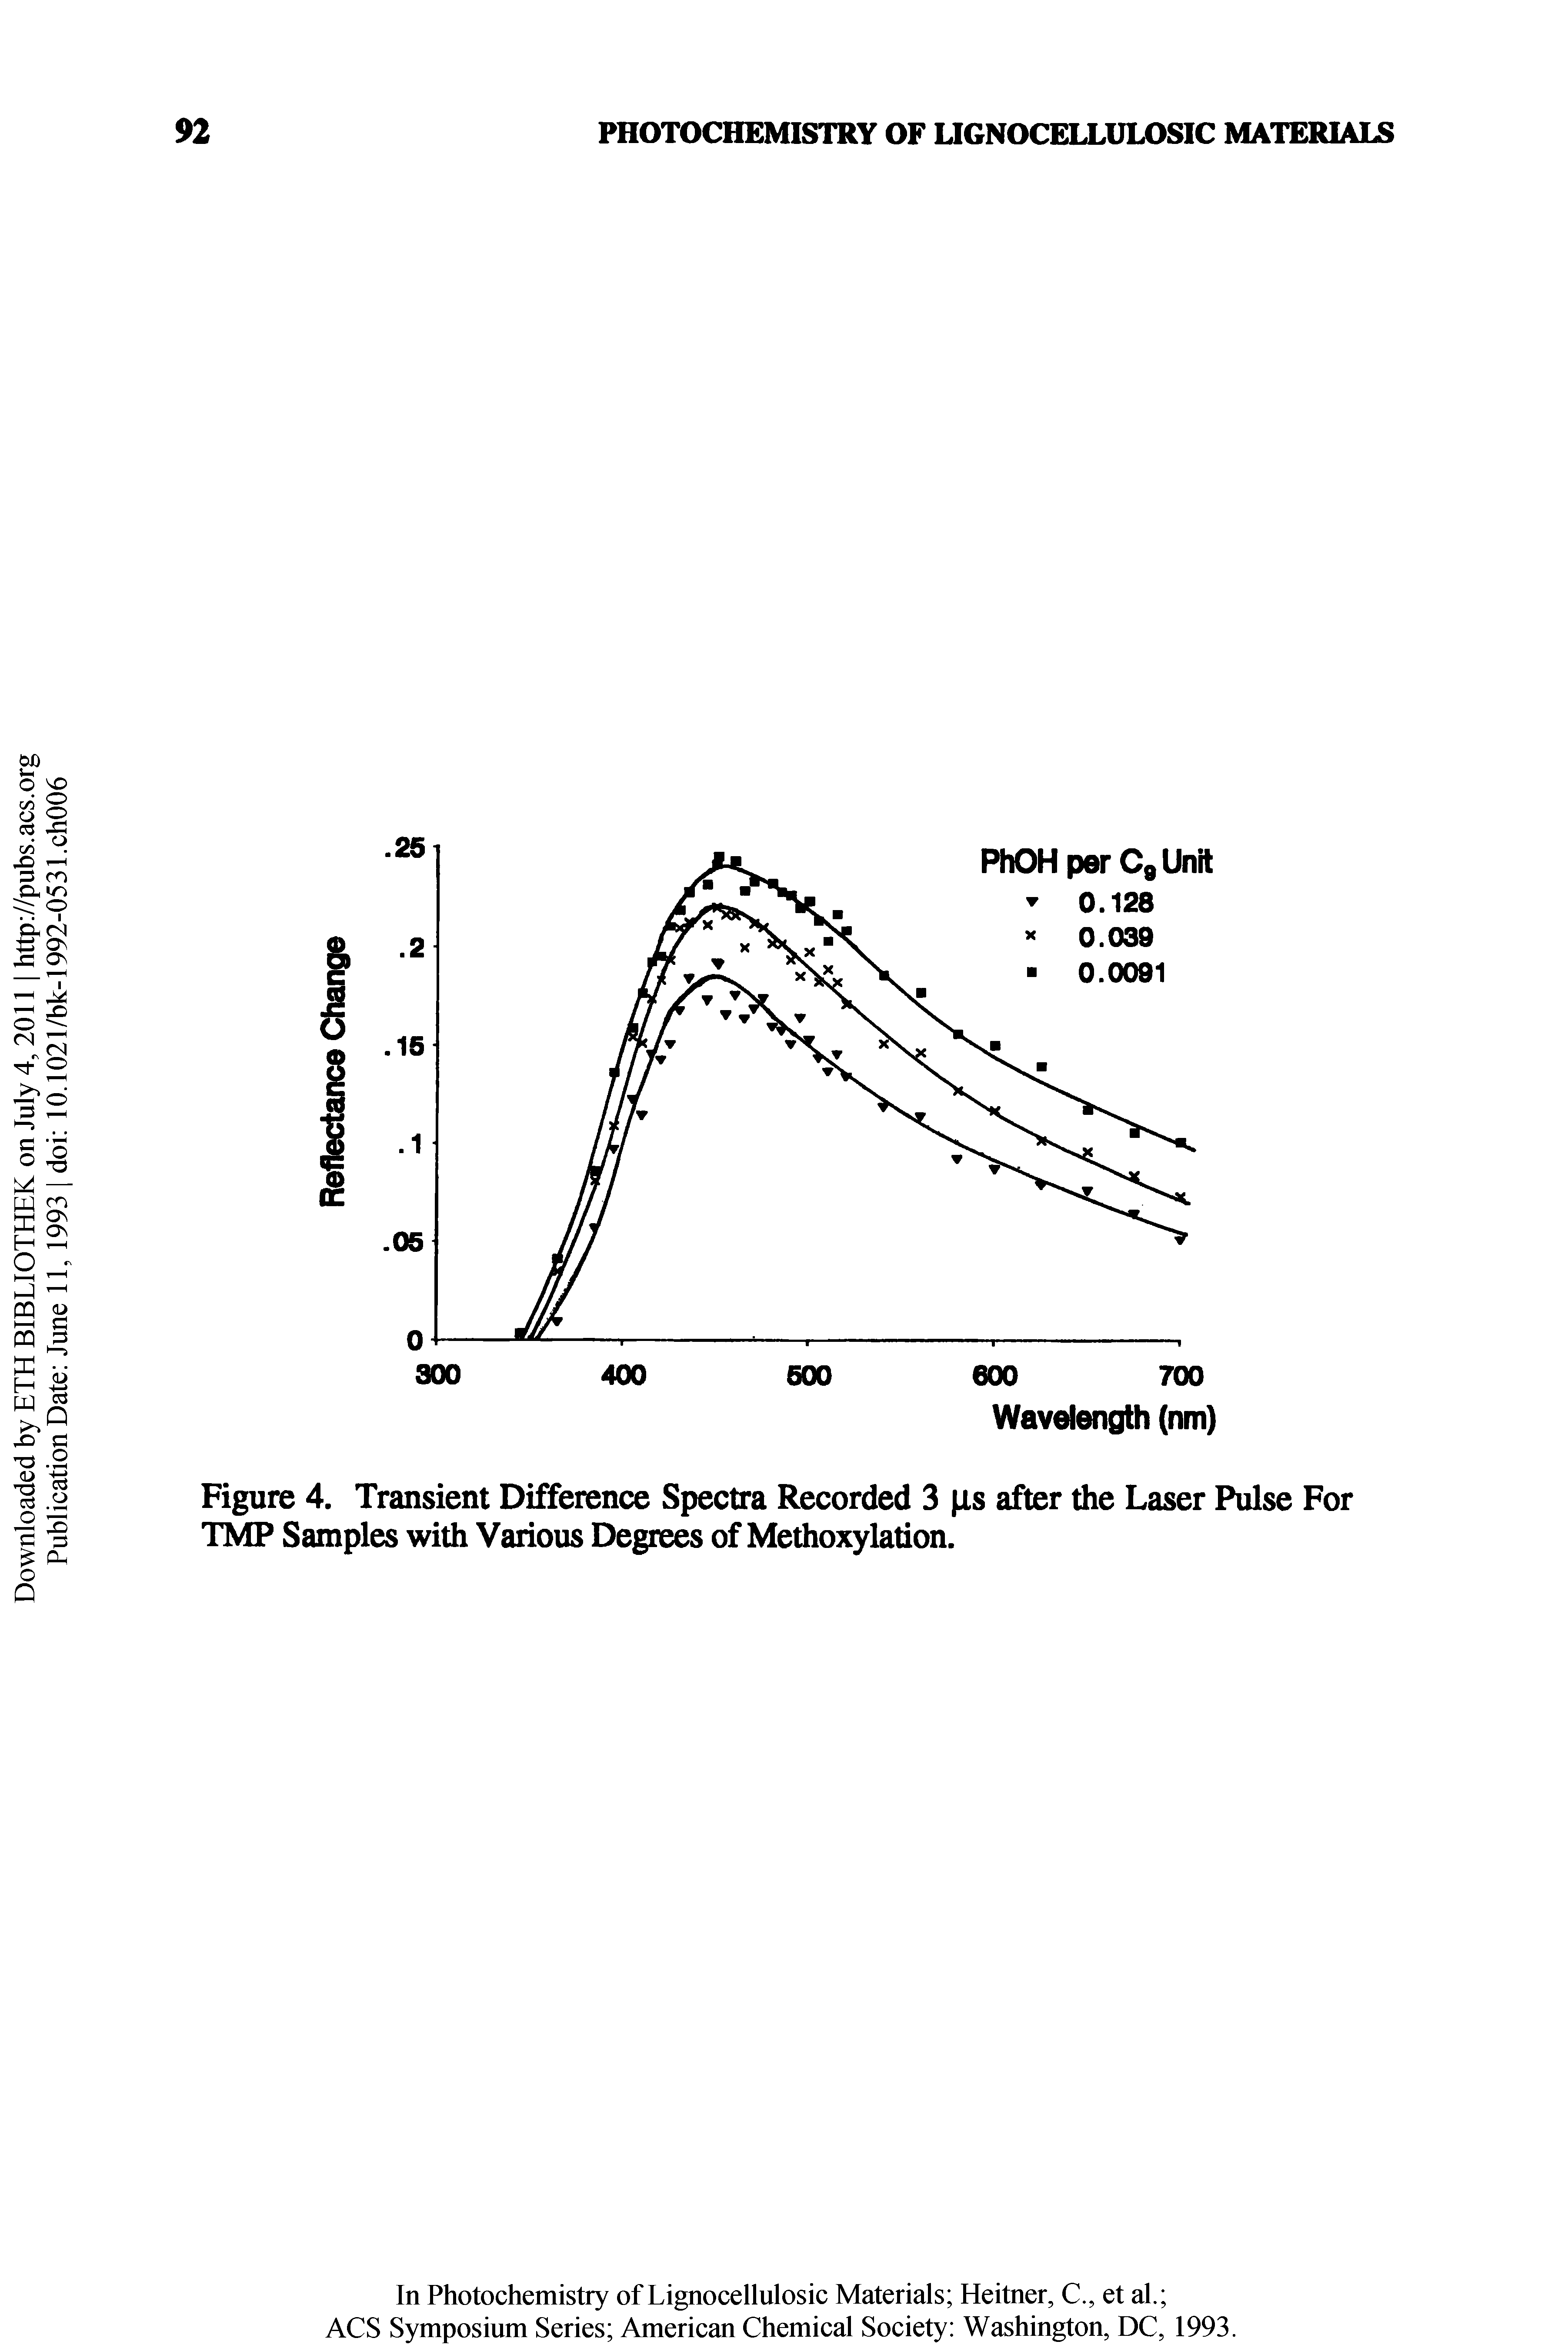 Figure 4. Transient Difference Spectra Recorded 3 (is after the Laser Pulse For TMP Samples with Various Degrees of Methoxylation.